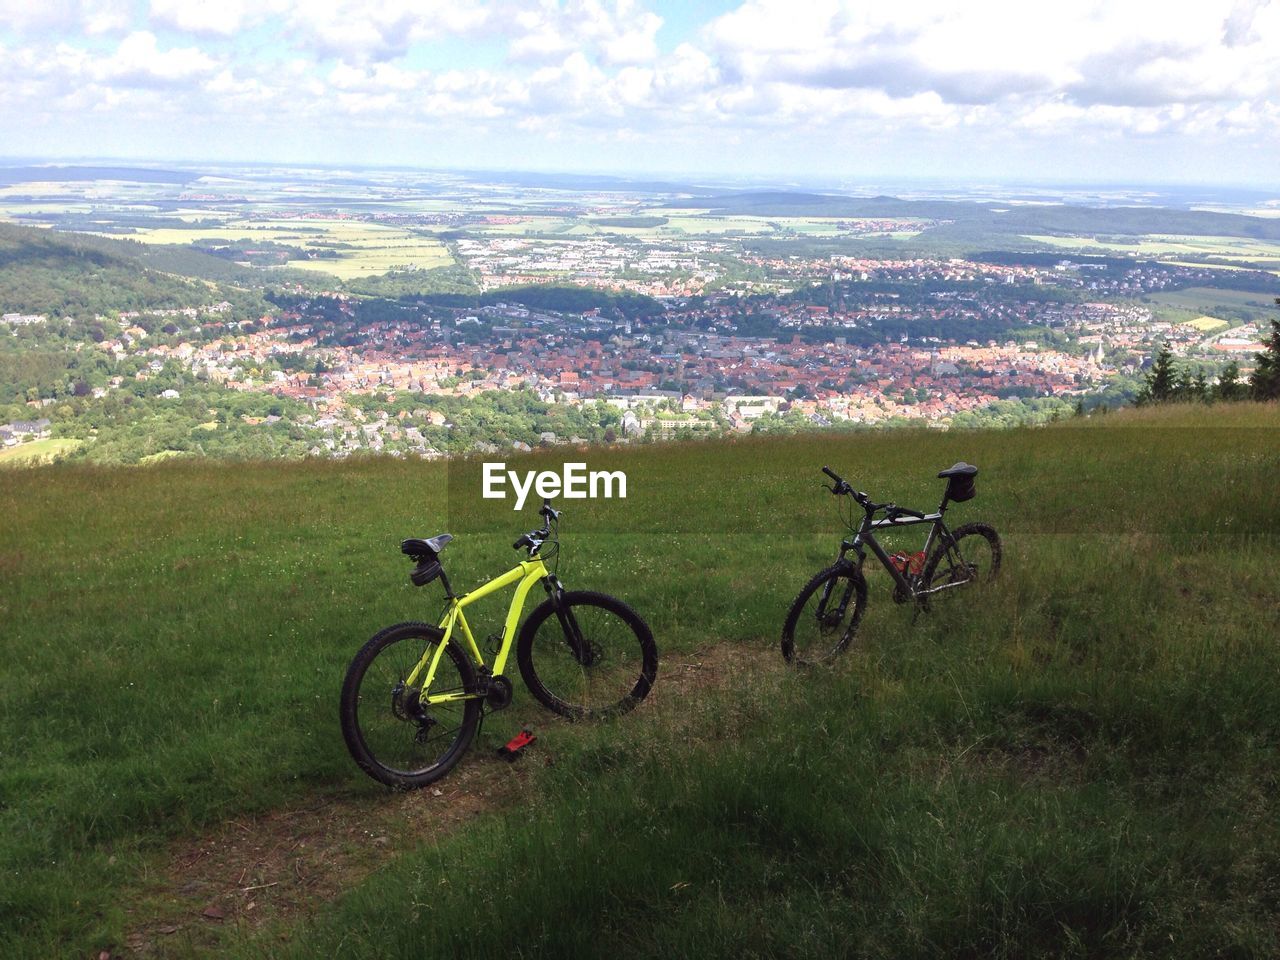 Bicycle on grassy landscape with town in background